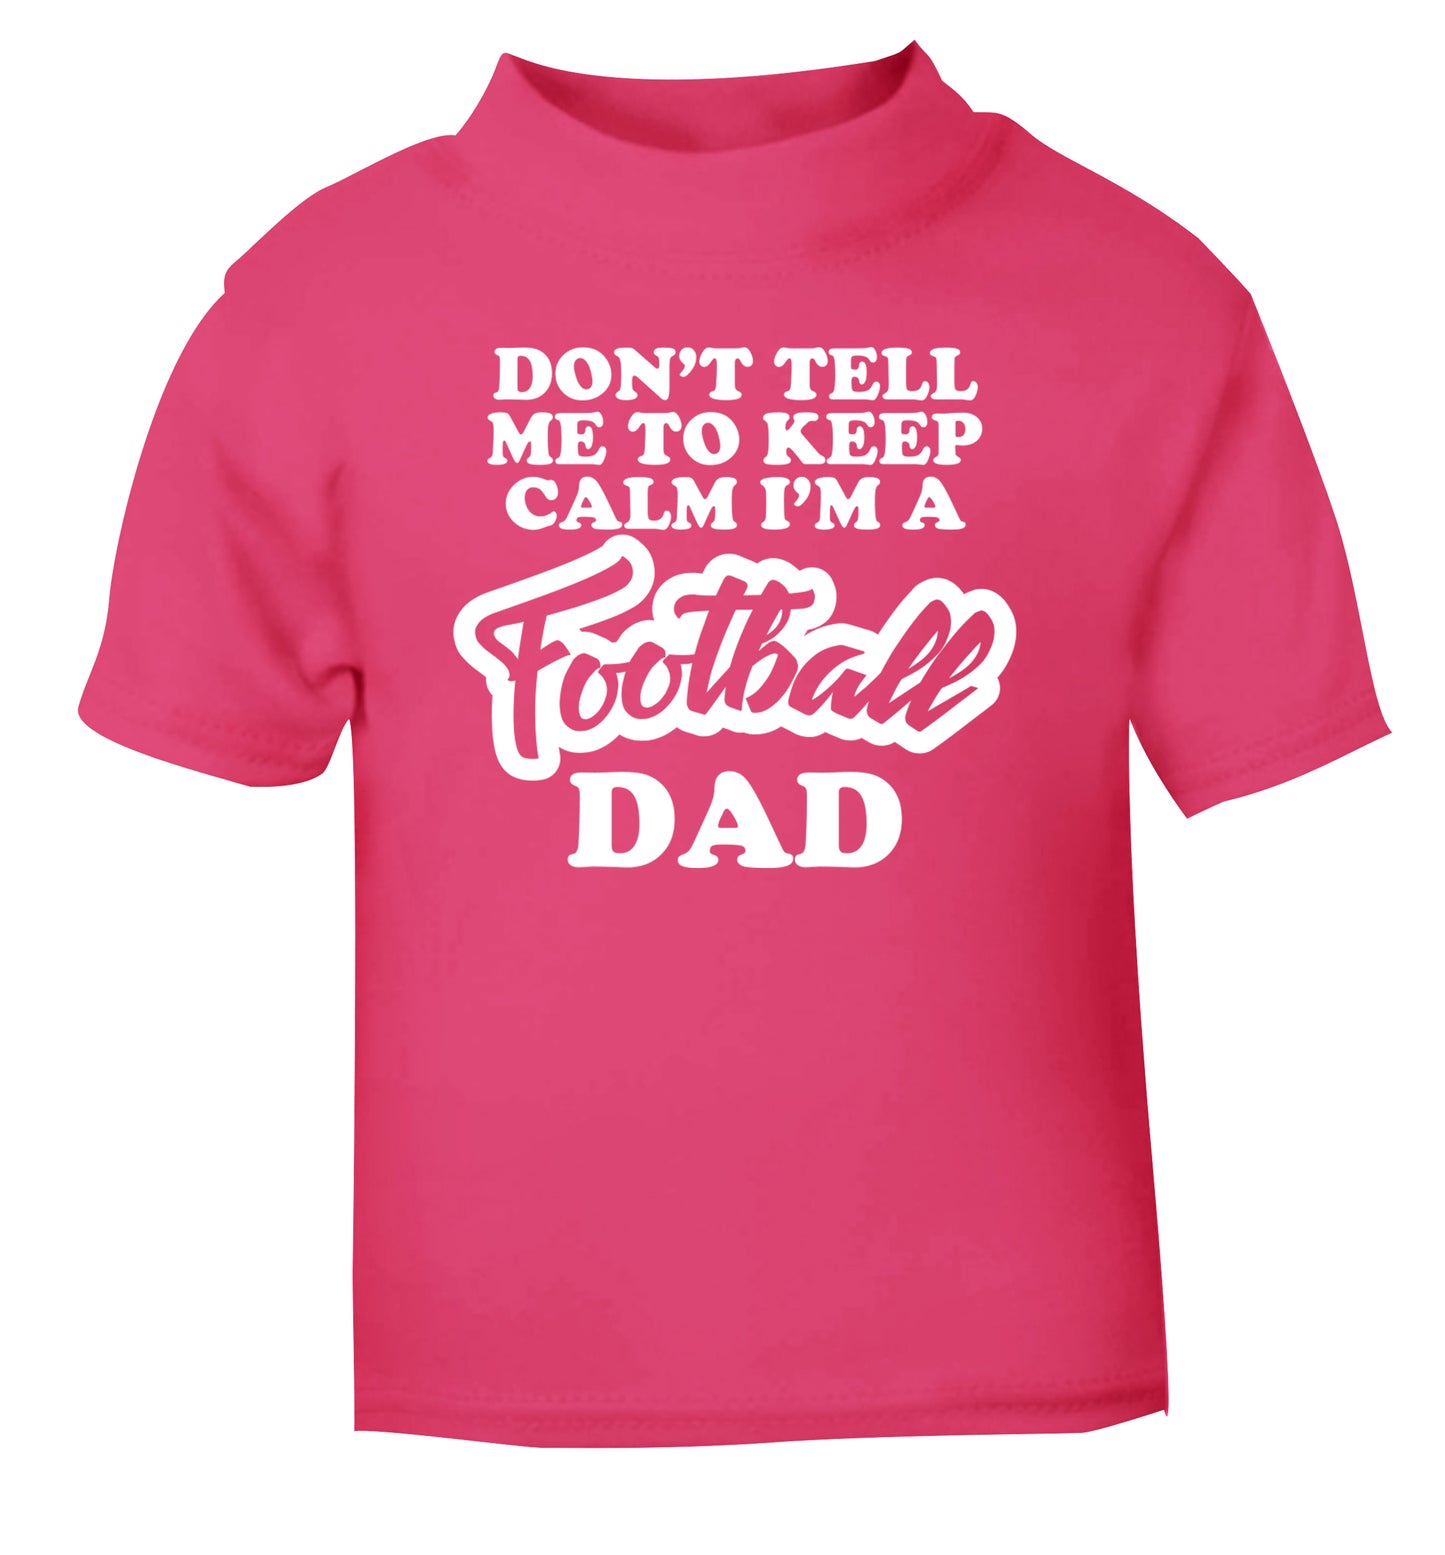 Don't tell me to keep calm I'm a football grandad pink Baby Toddler Tshirt 2 Years